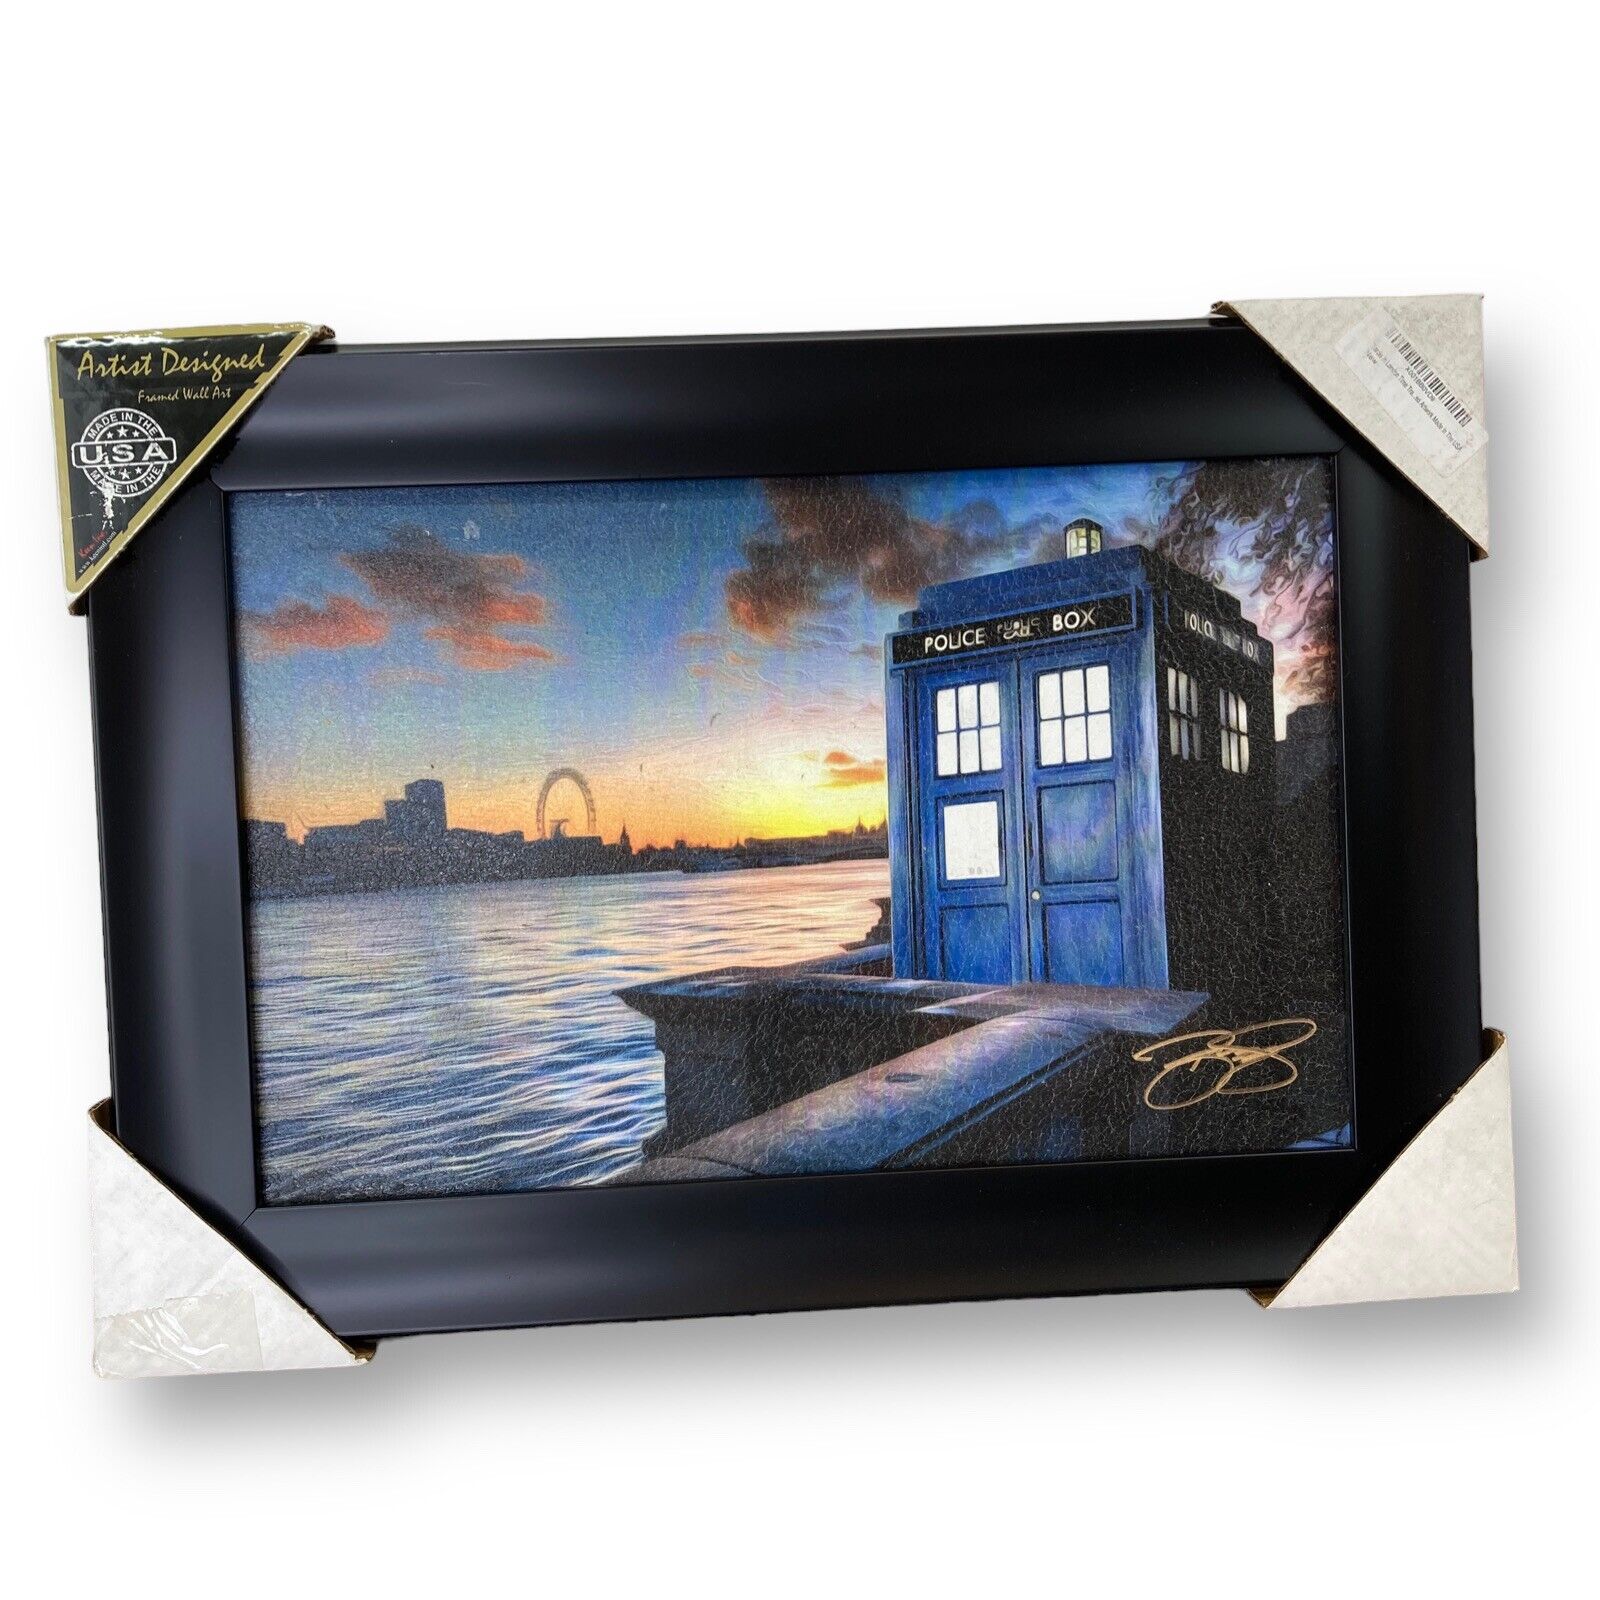 New Dr. Who Tardis Framed Wall Art 20.5” X 14.5” London Police Box Time Travel